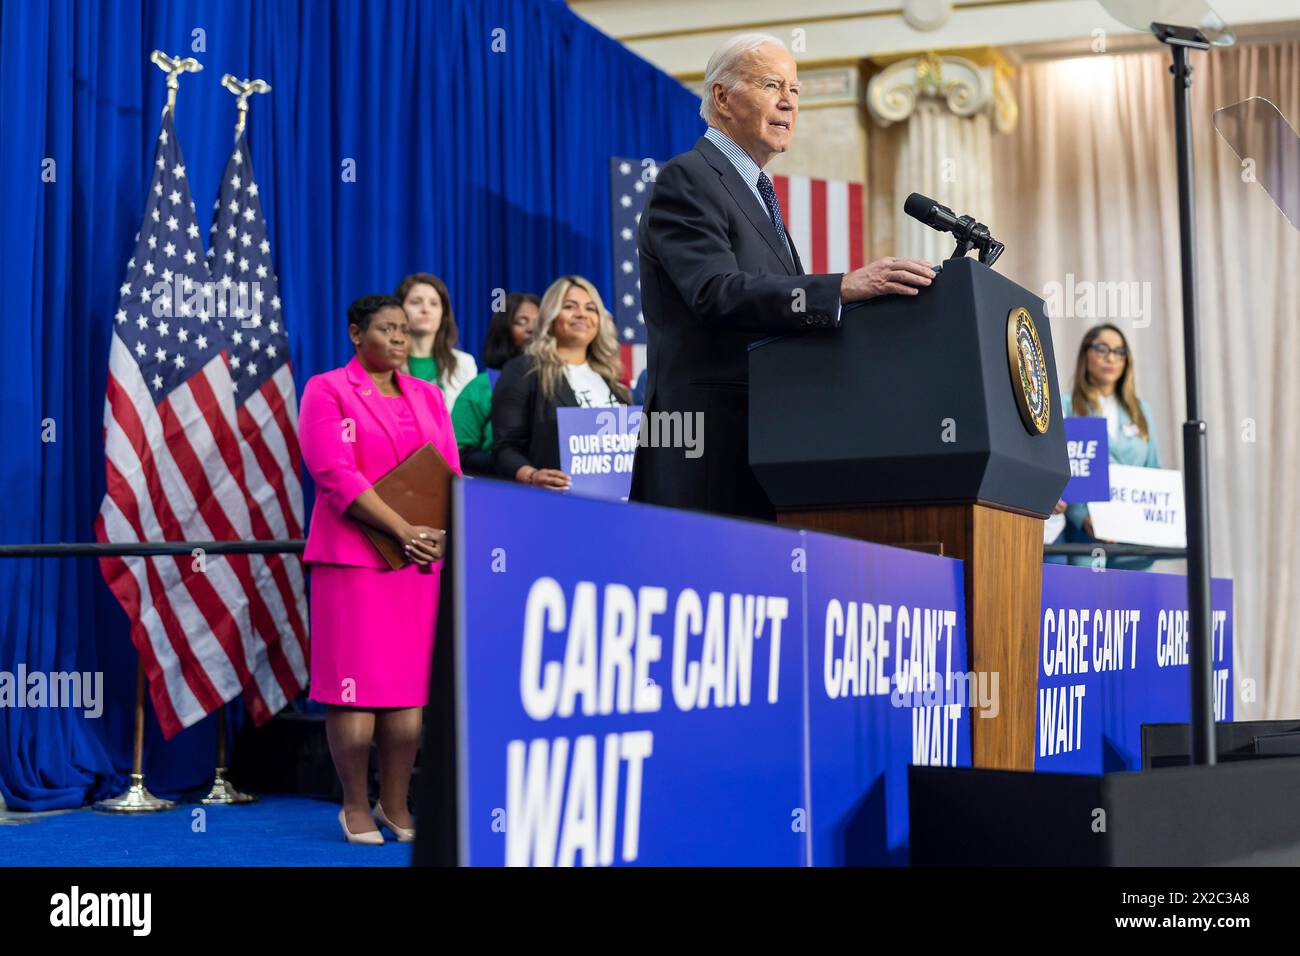 Washington, United States of America. 09 April, 2024. U.S President Joe Biden delivers remarks on investments in caregiving and care workers at a “Care Can’t Wait” event at Union Station, April 9, 2024 in Washington, D.C. Credit: Cameron Smith/White House Photo/Alamy Live News Stock Photo